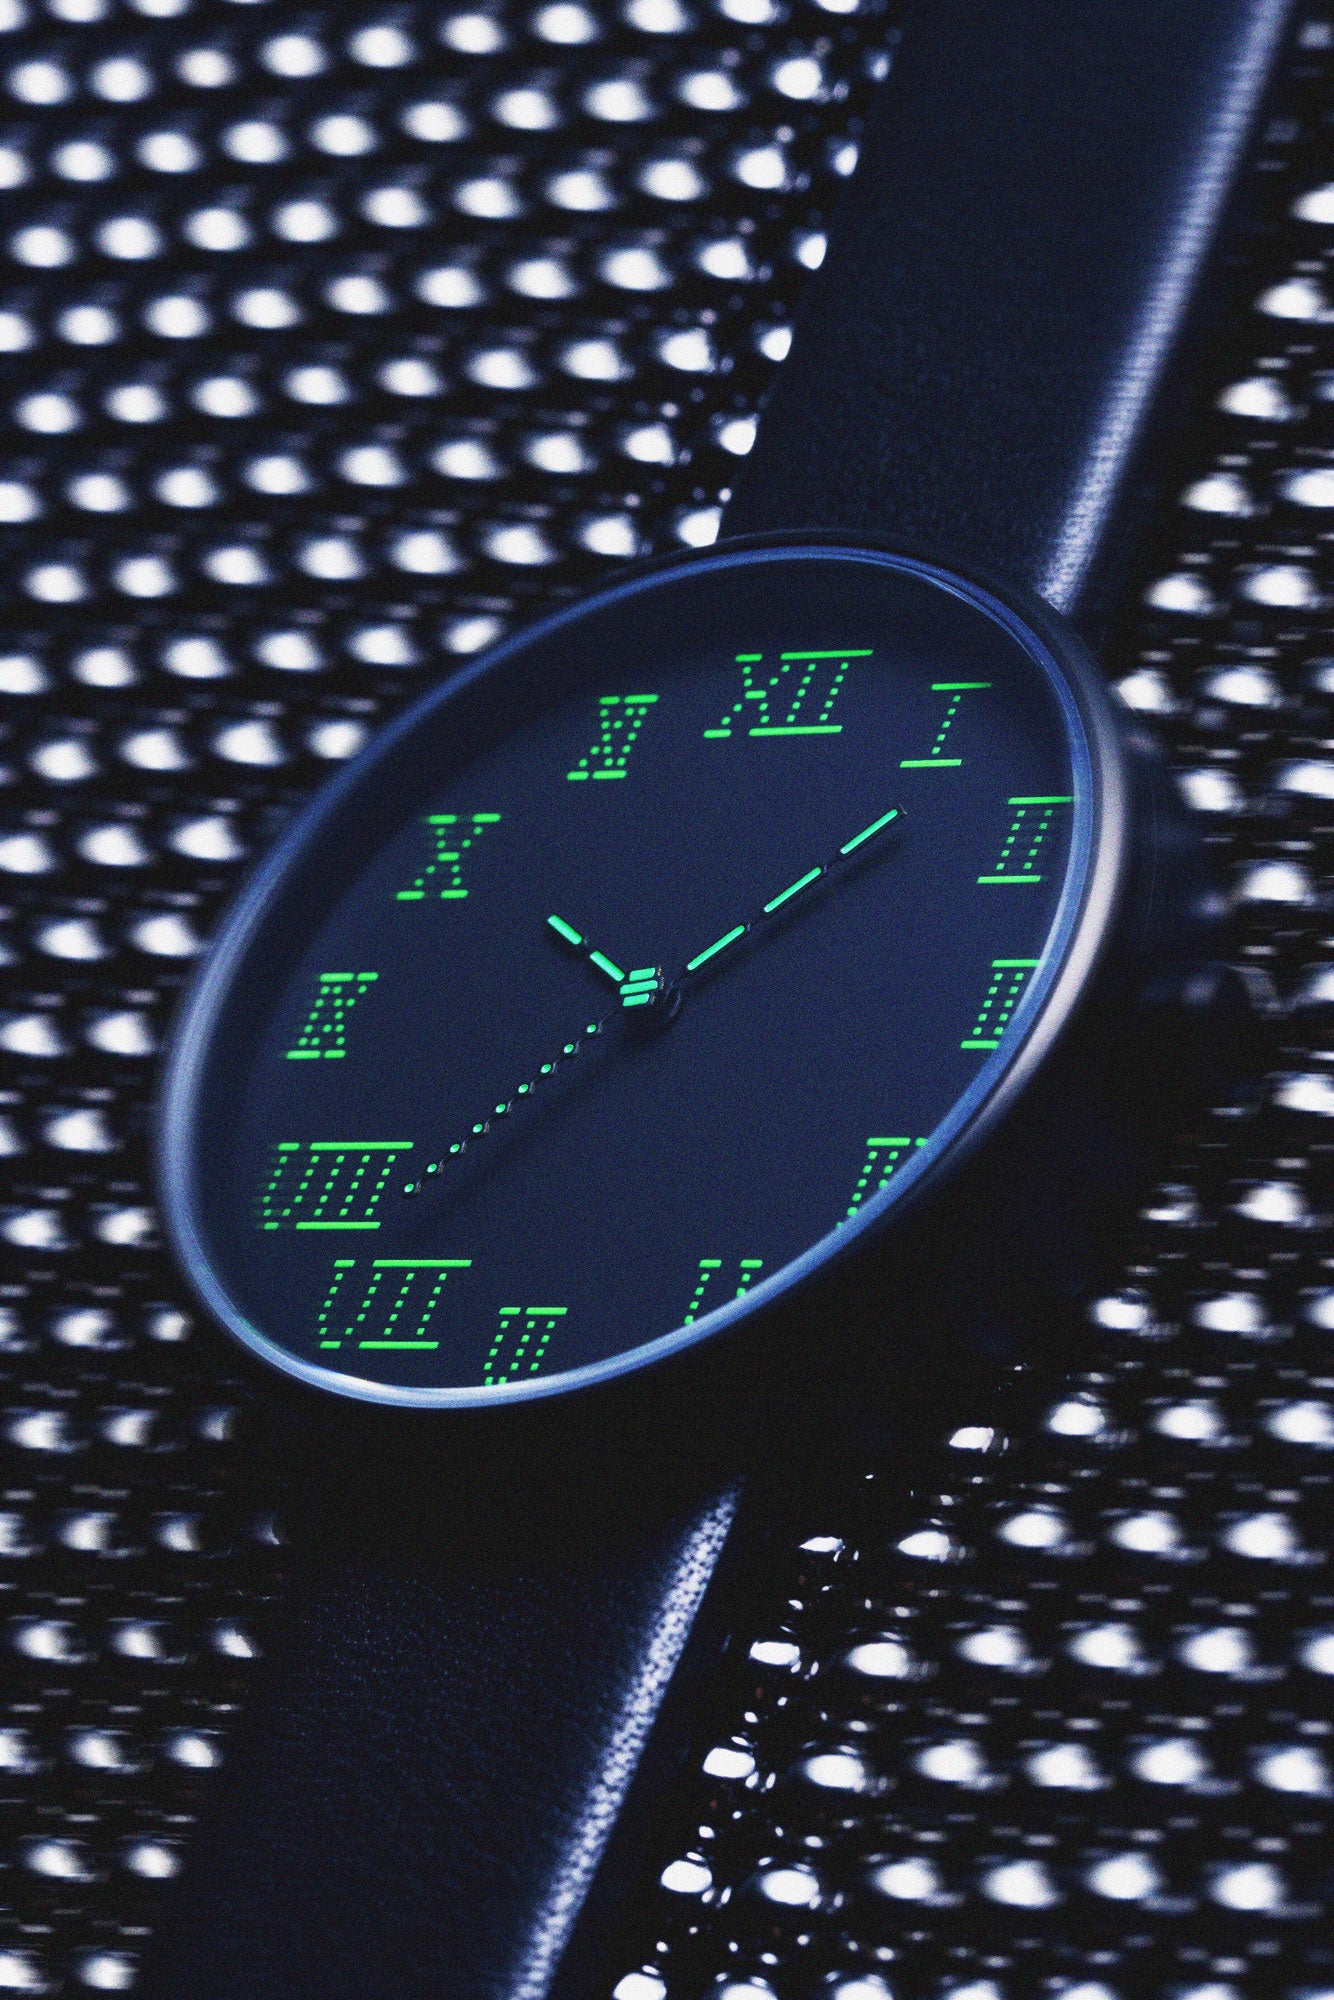 Showcasing the front of the TTT - ACTUAL SOURCE - THERMAL watch against a metallic sphere background.